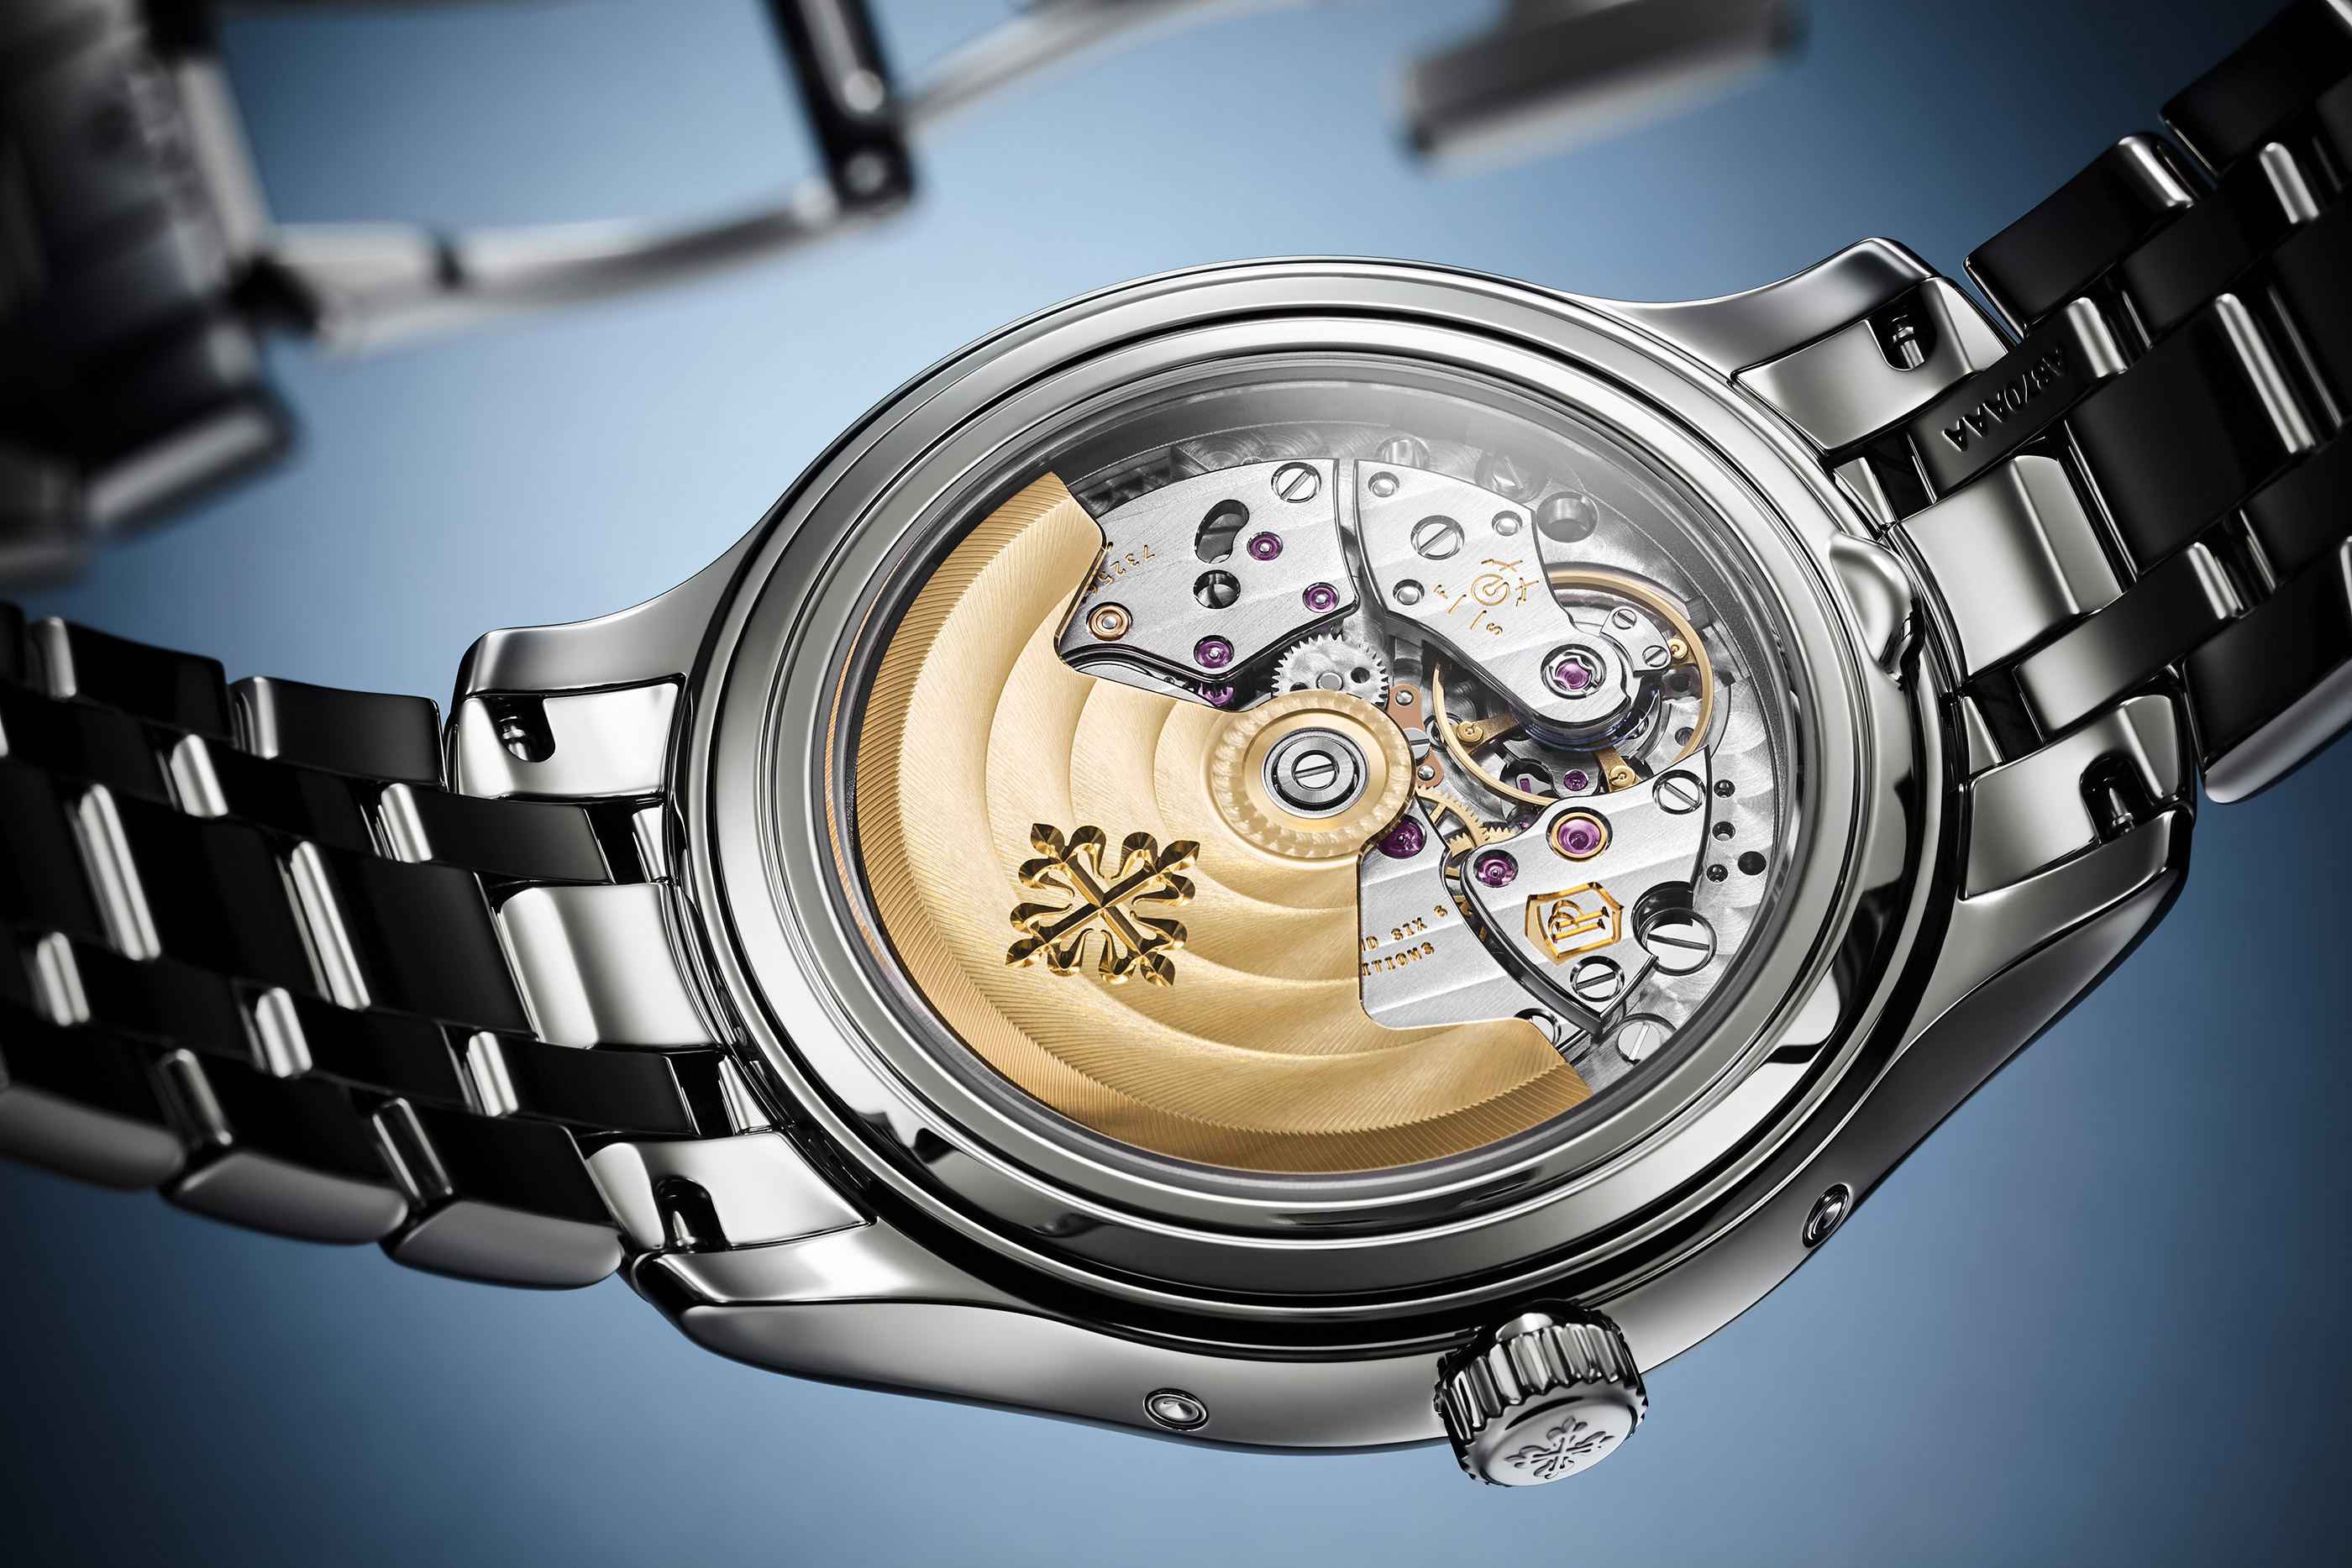 COMPLICATIONS SELF-WINDING - ANNUAL CALENDAR, MOON PHASES